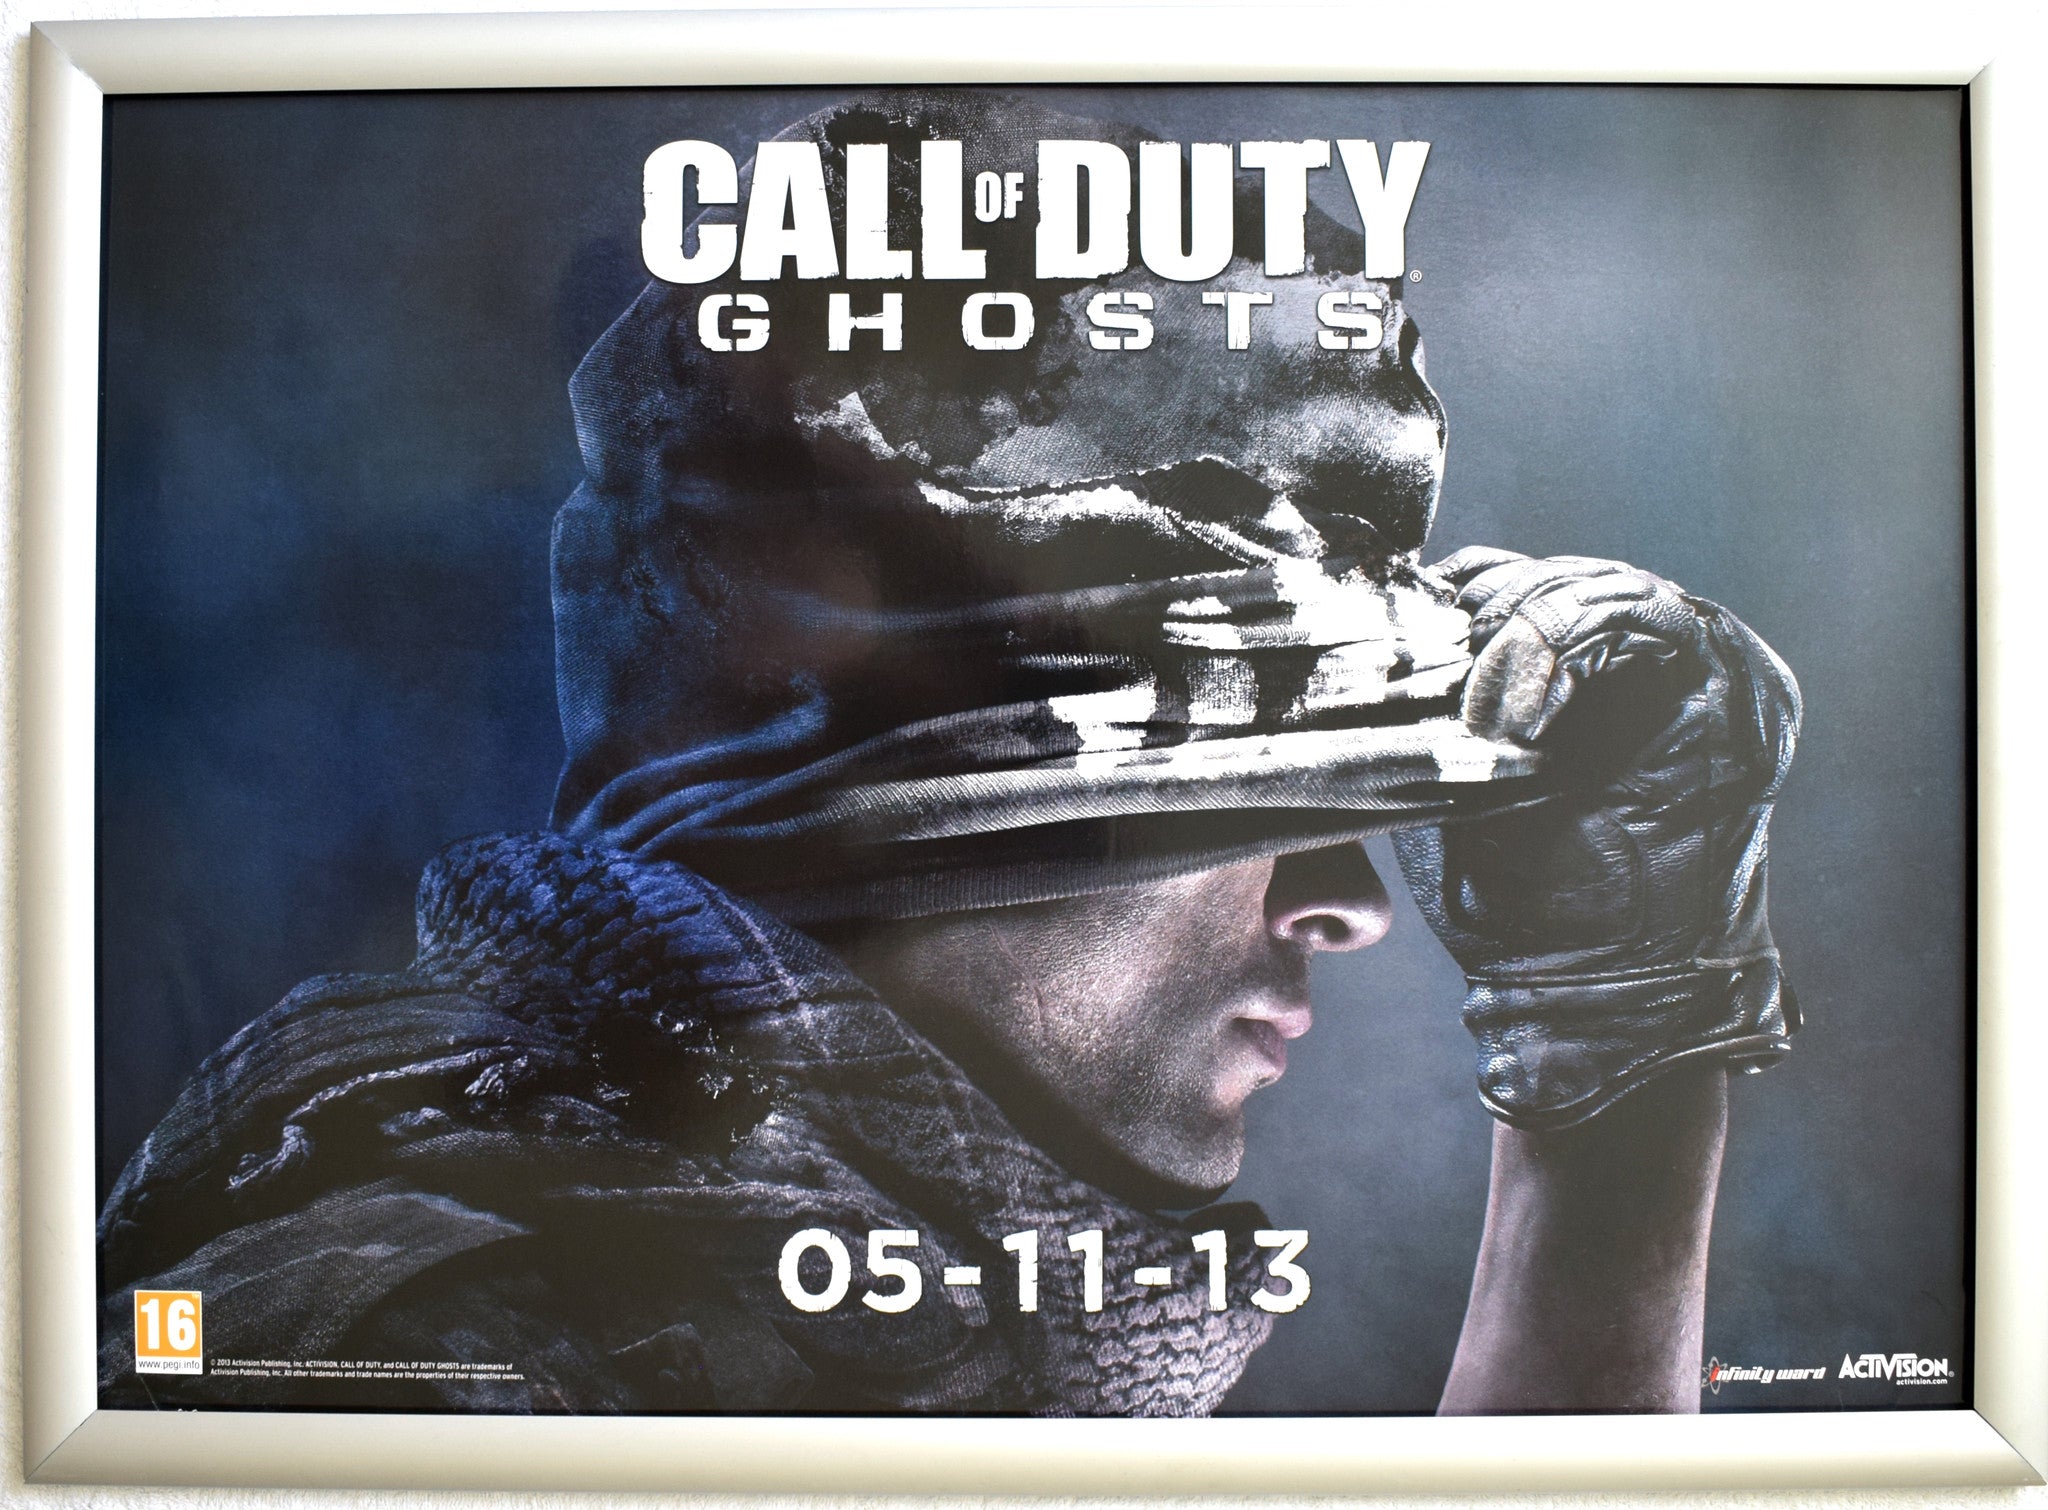 Call of Duty Ghosts (A2) Promotional Poster #2